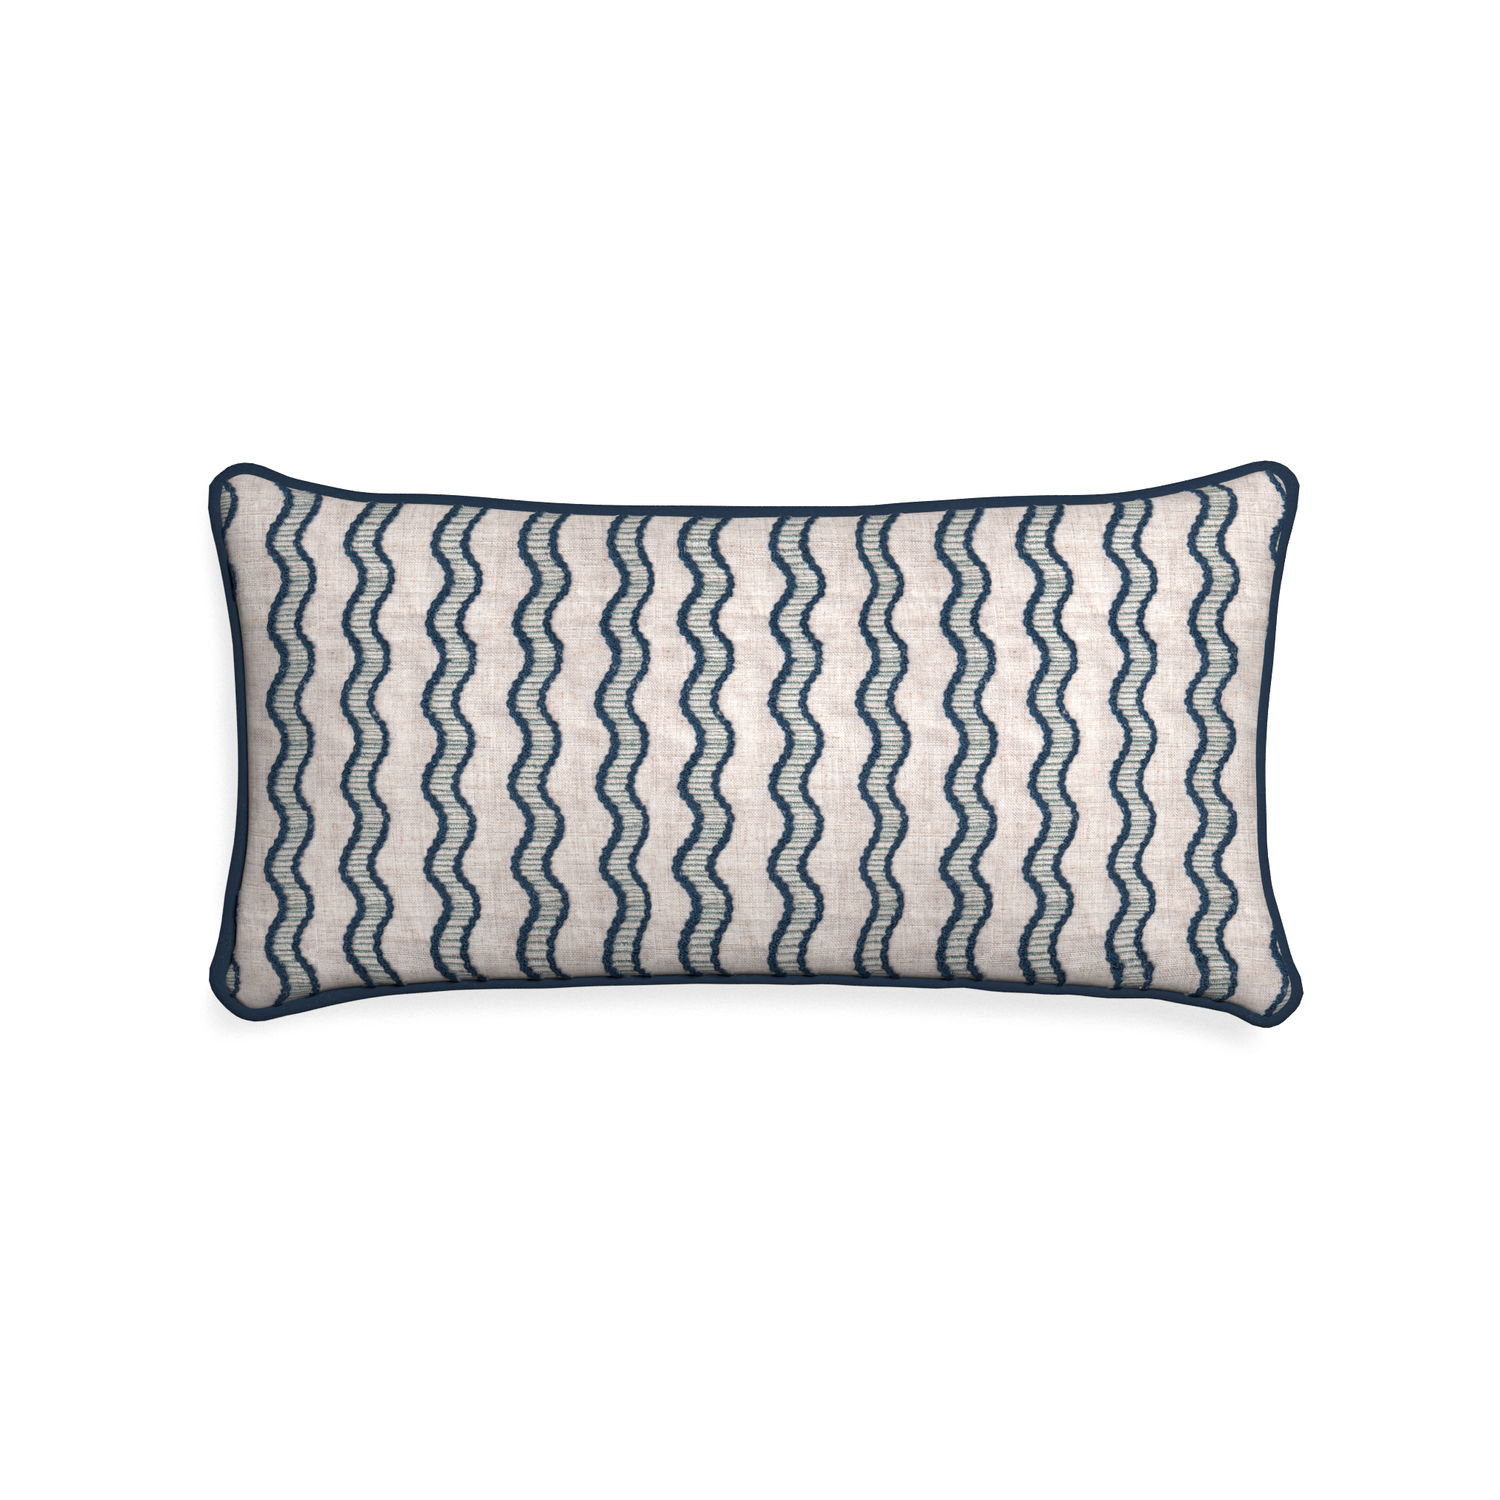 Midi-lumbar beatrice custom embroidered wavepillow with c piping on white background